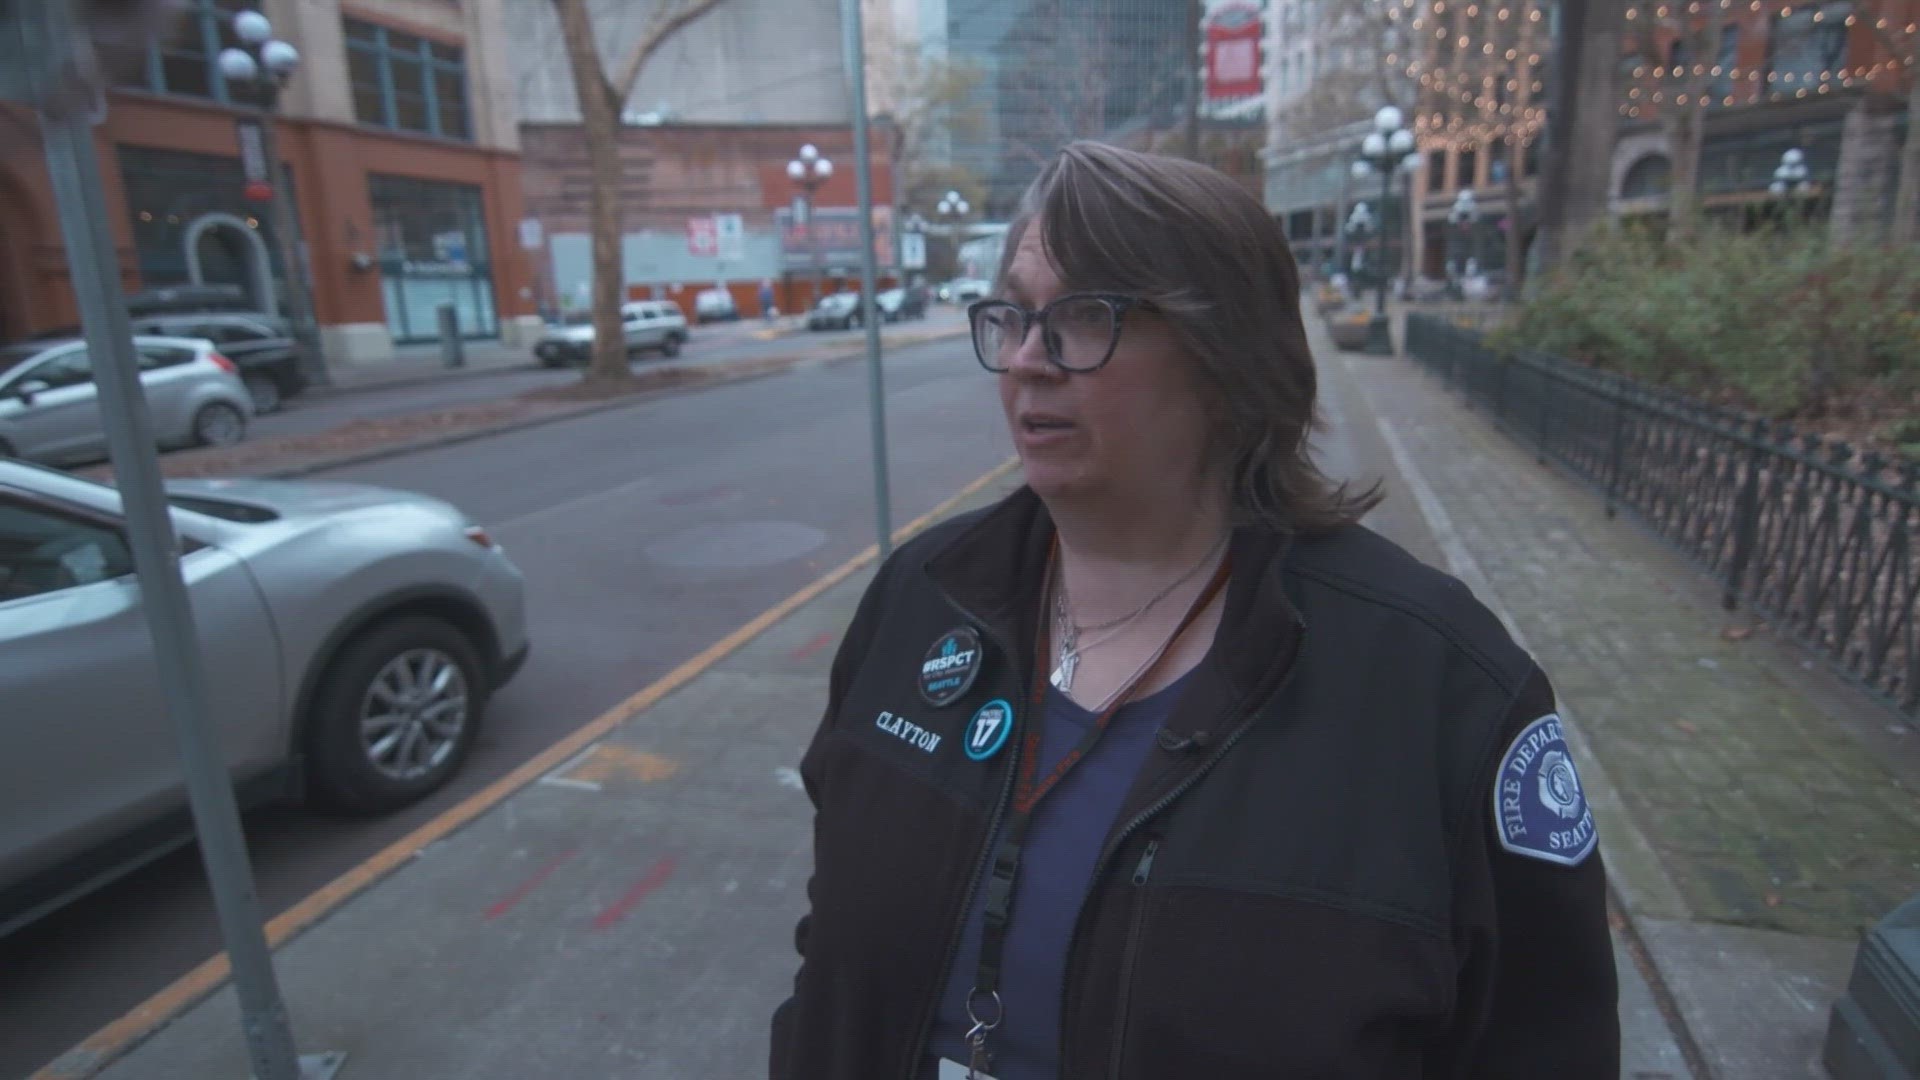 The Seattle City Council President says it is the cost-of-living increases employees deserve.